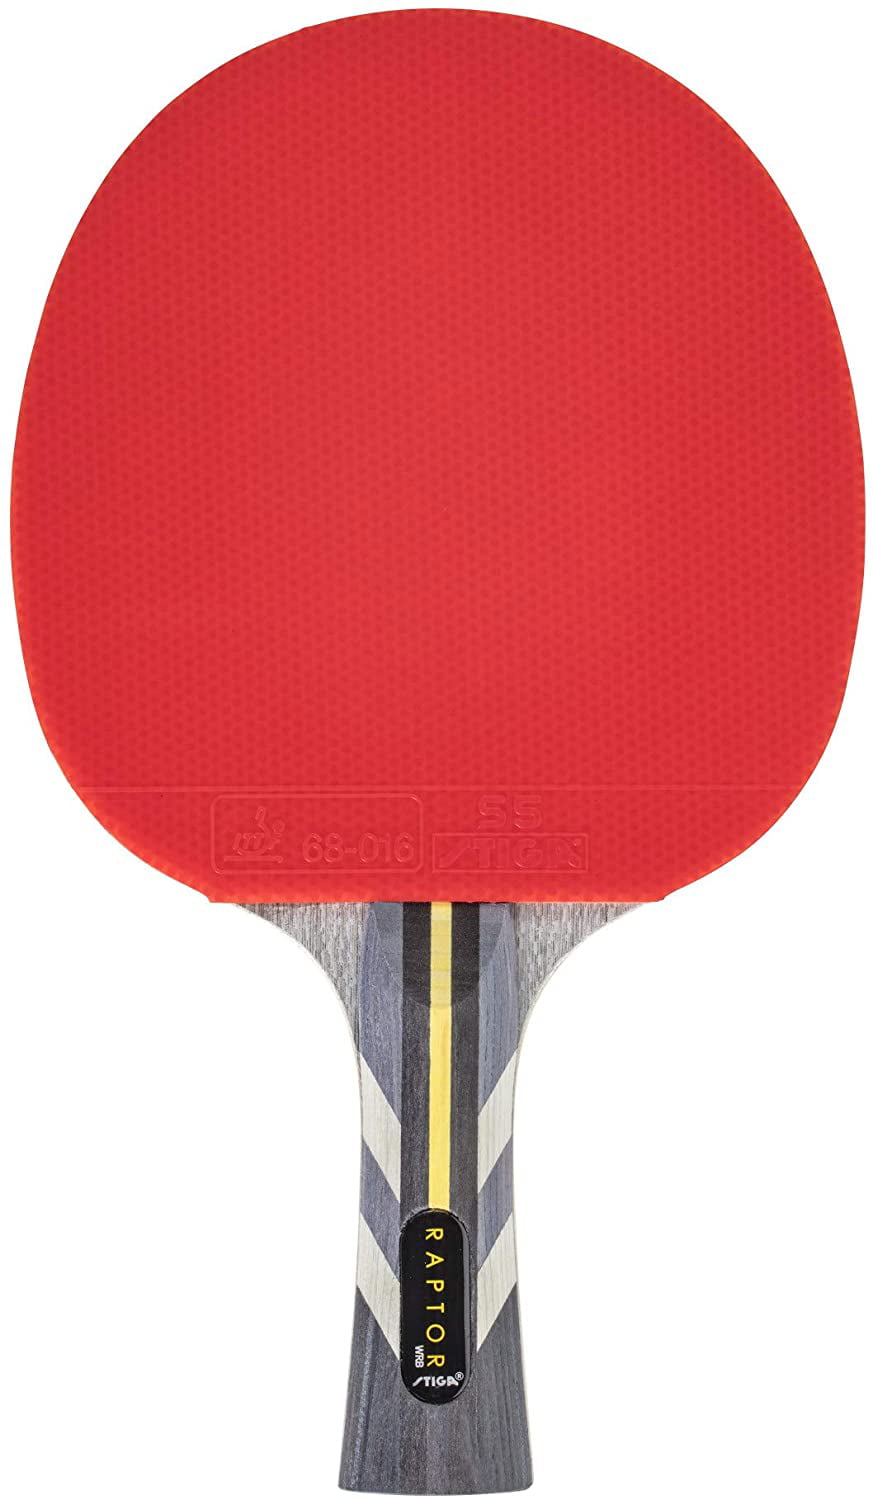 TWO Stiga RAPTOR Table Tennis Bats Ping Pong Racquets Black/Red 